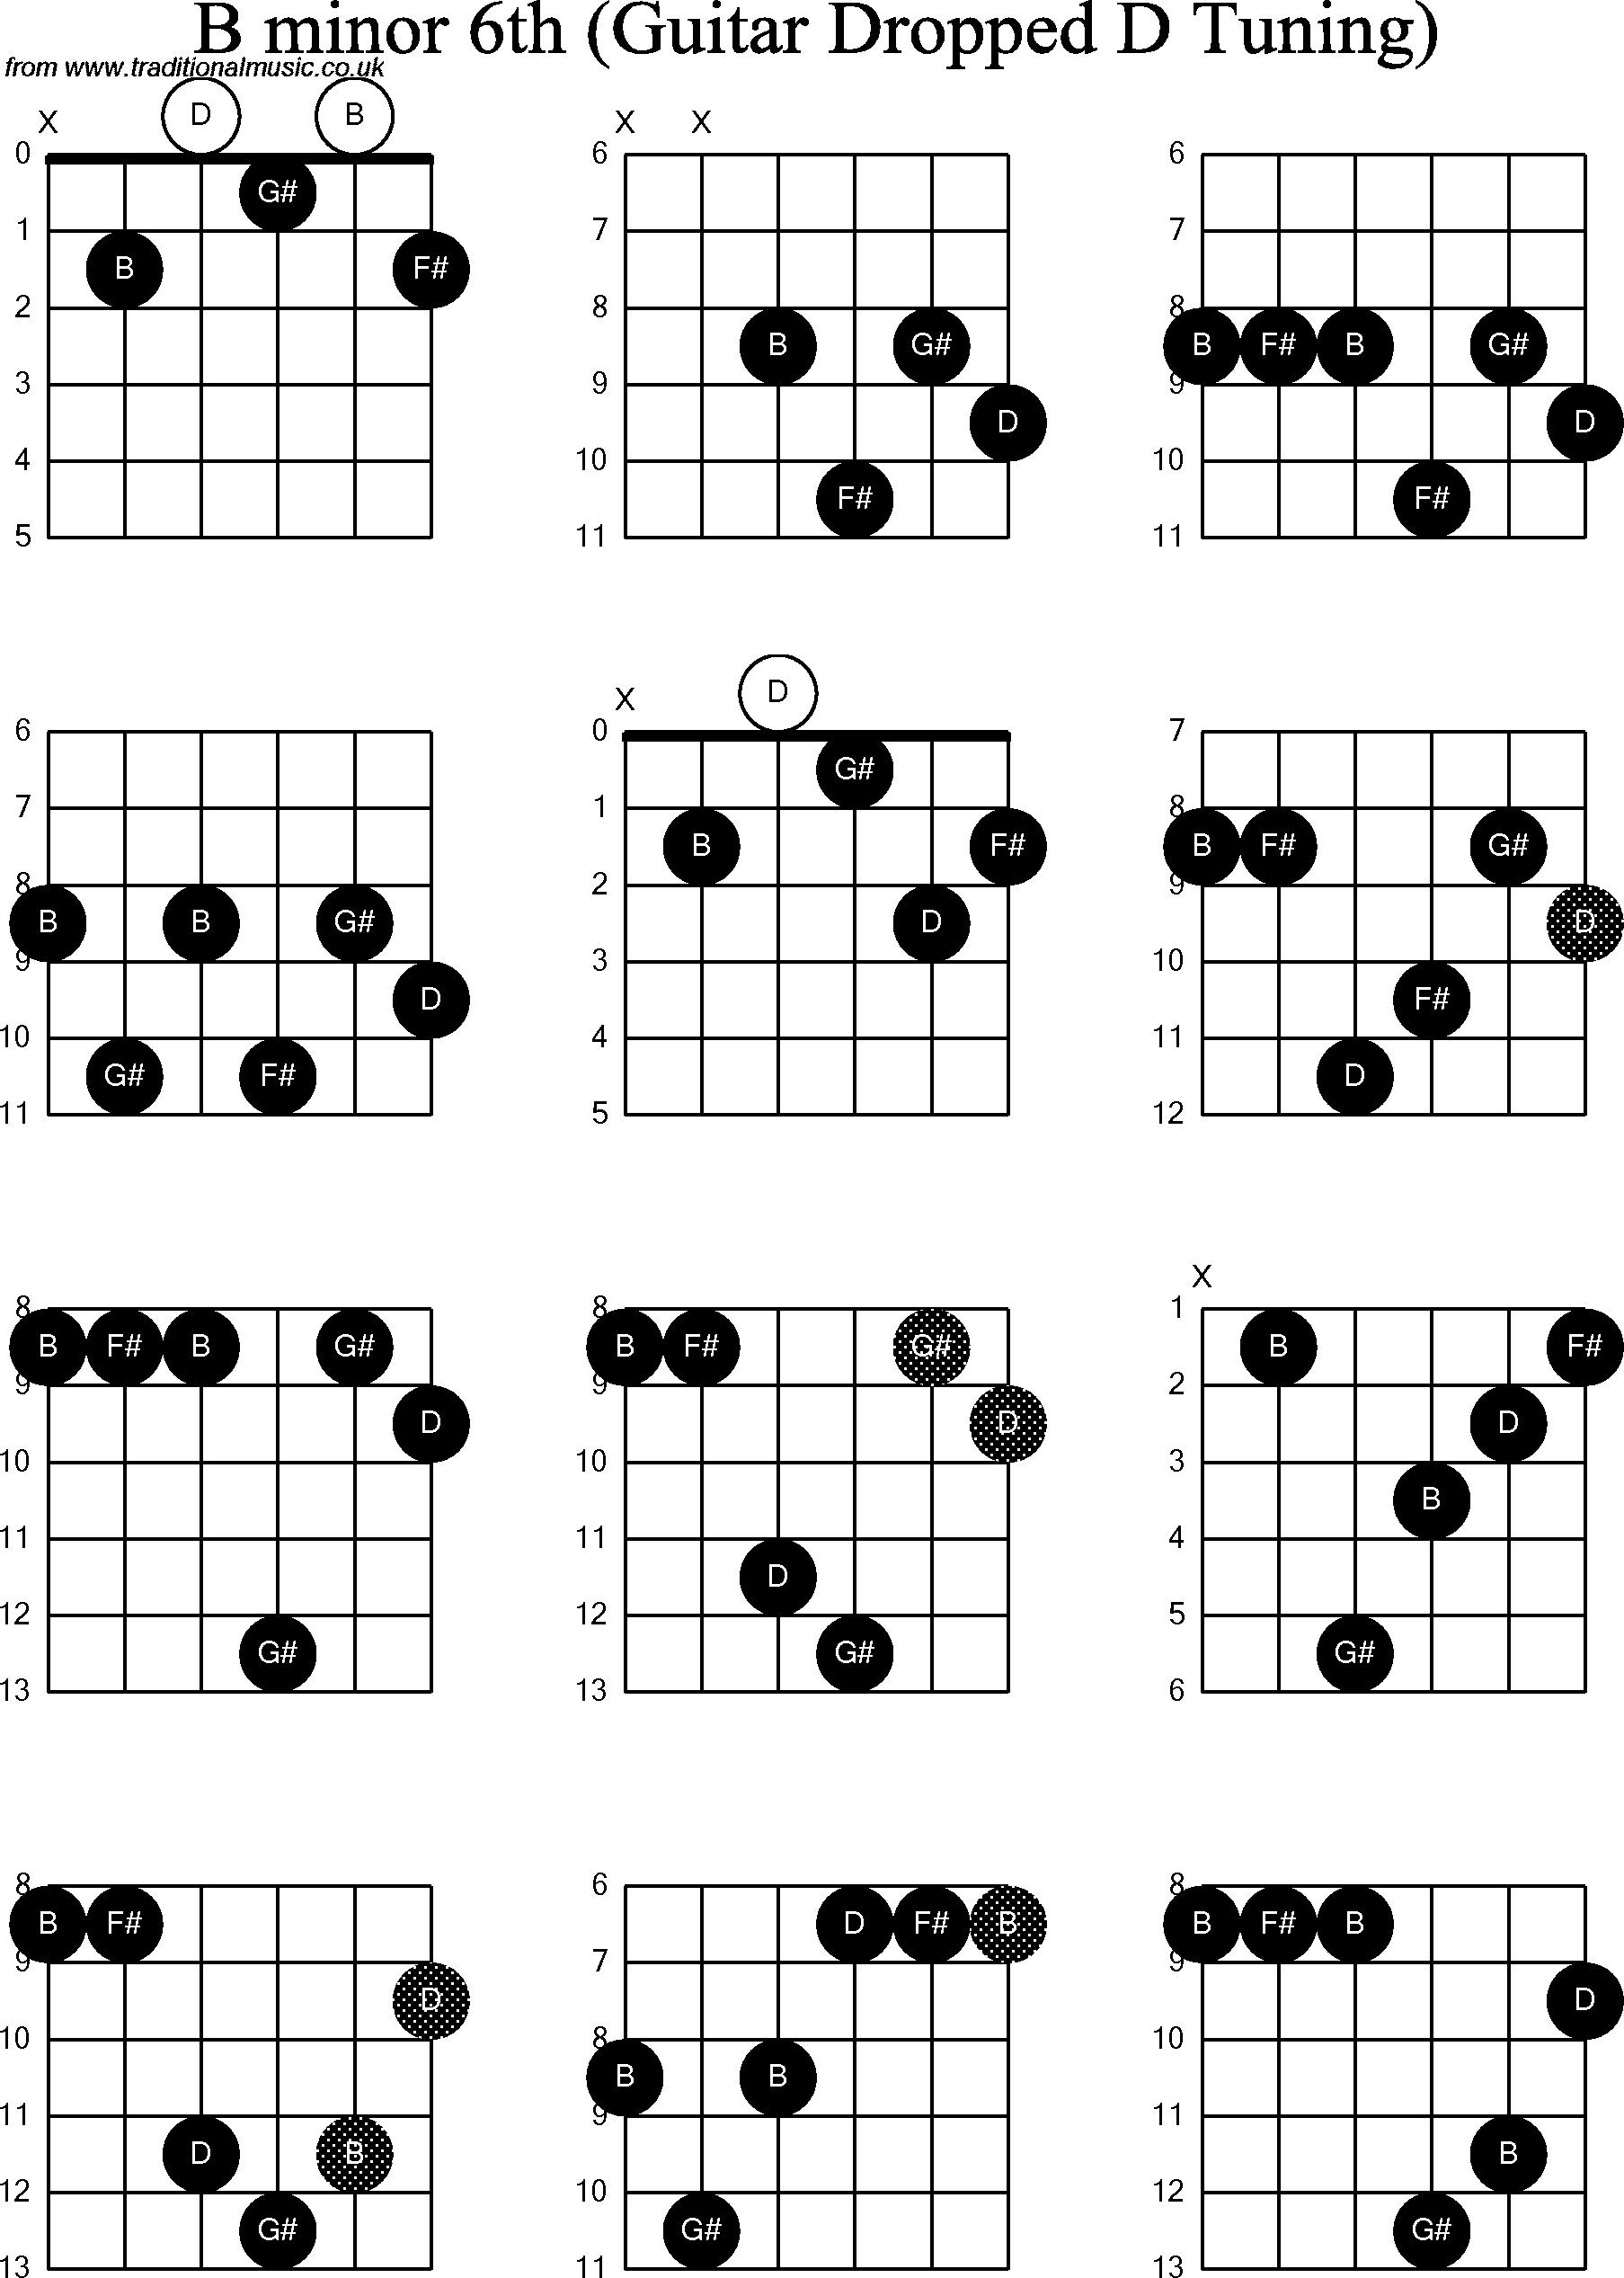 Chord diagrams for dropped D Guitar(DADGBE), B Minor6th